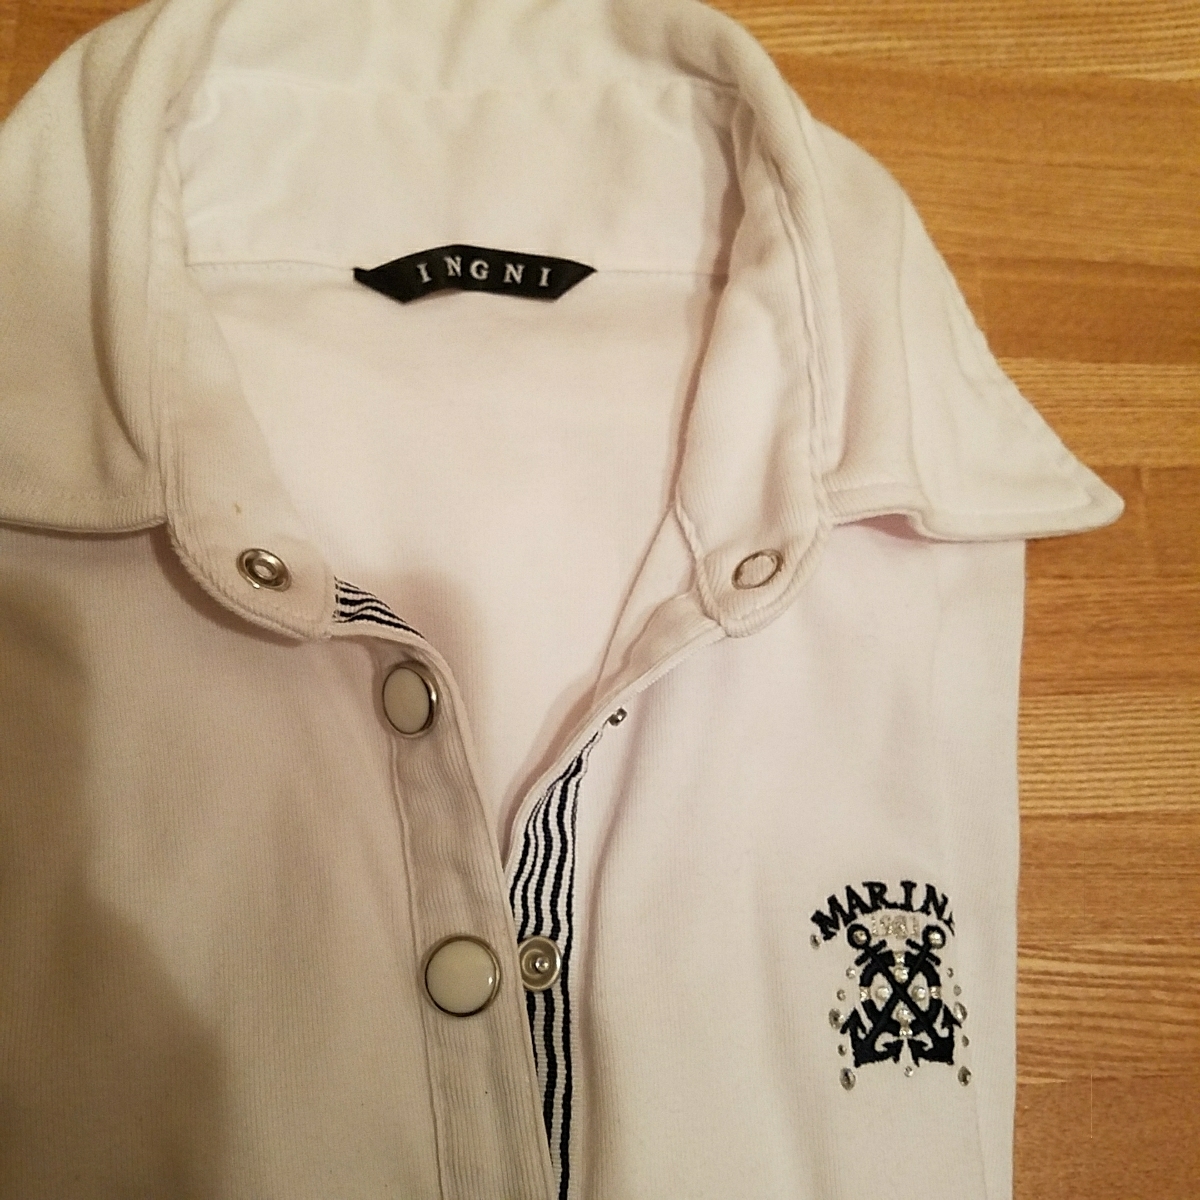  secondhand goods *INGNI polo-shirt / size M